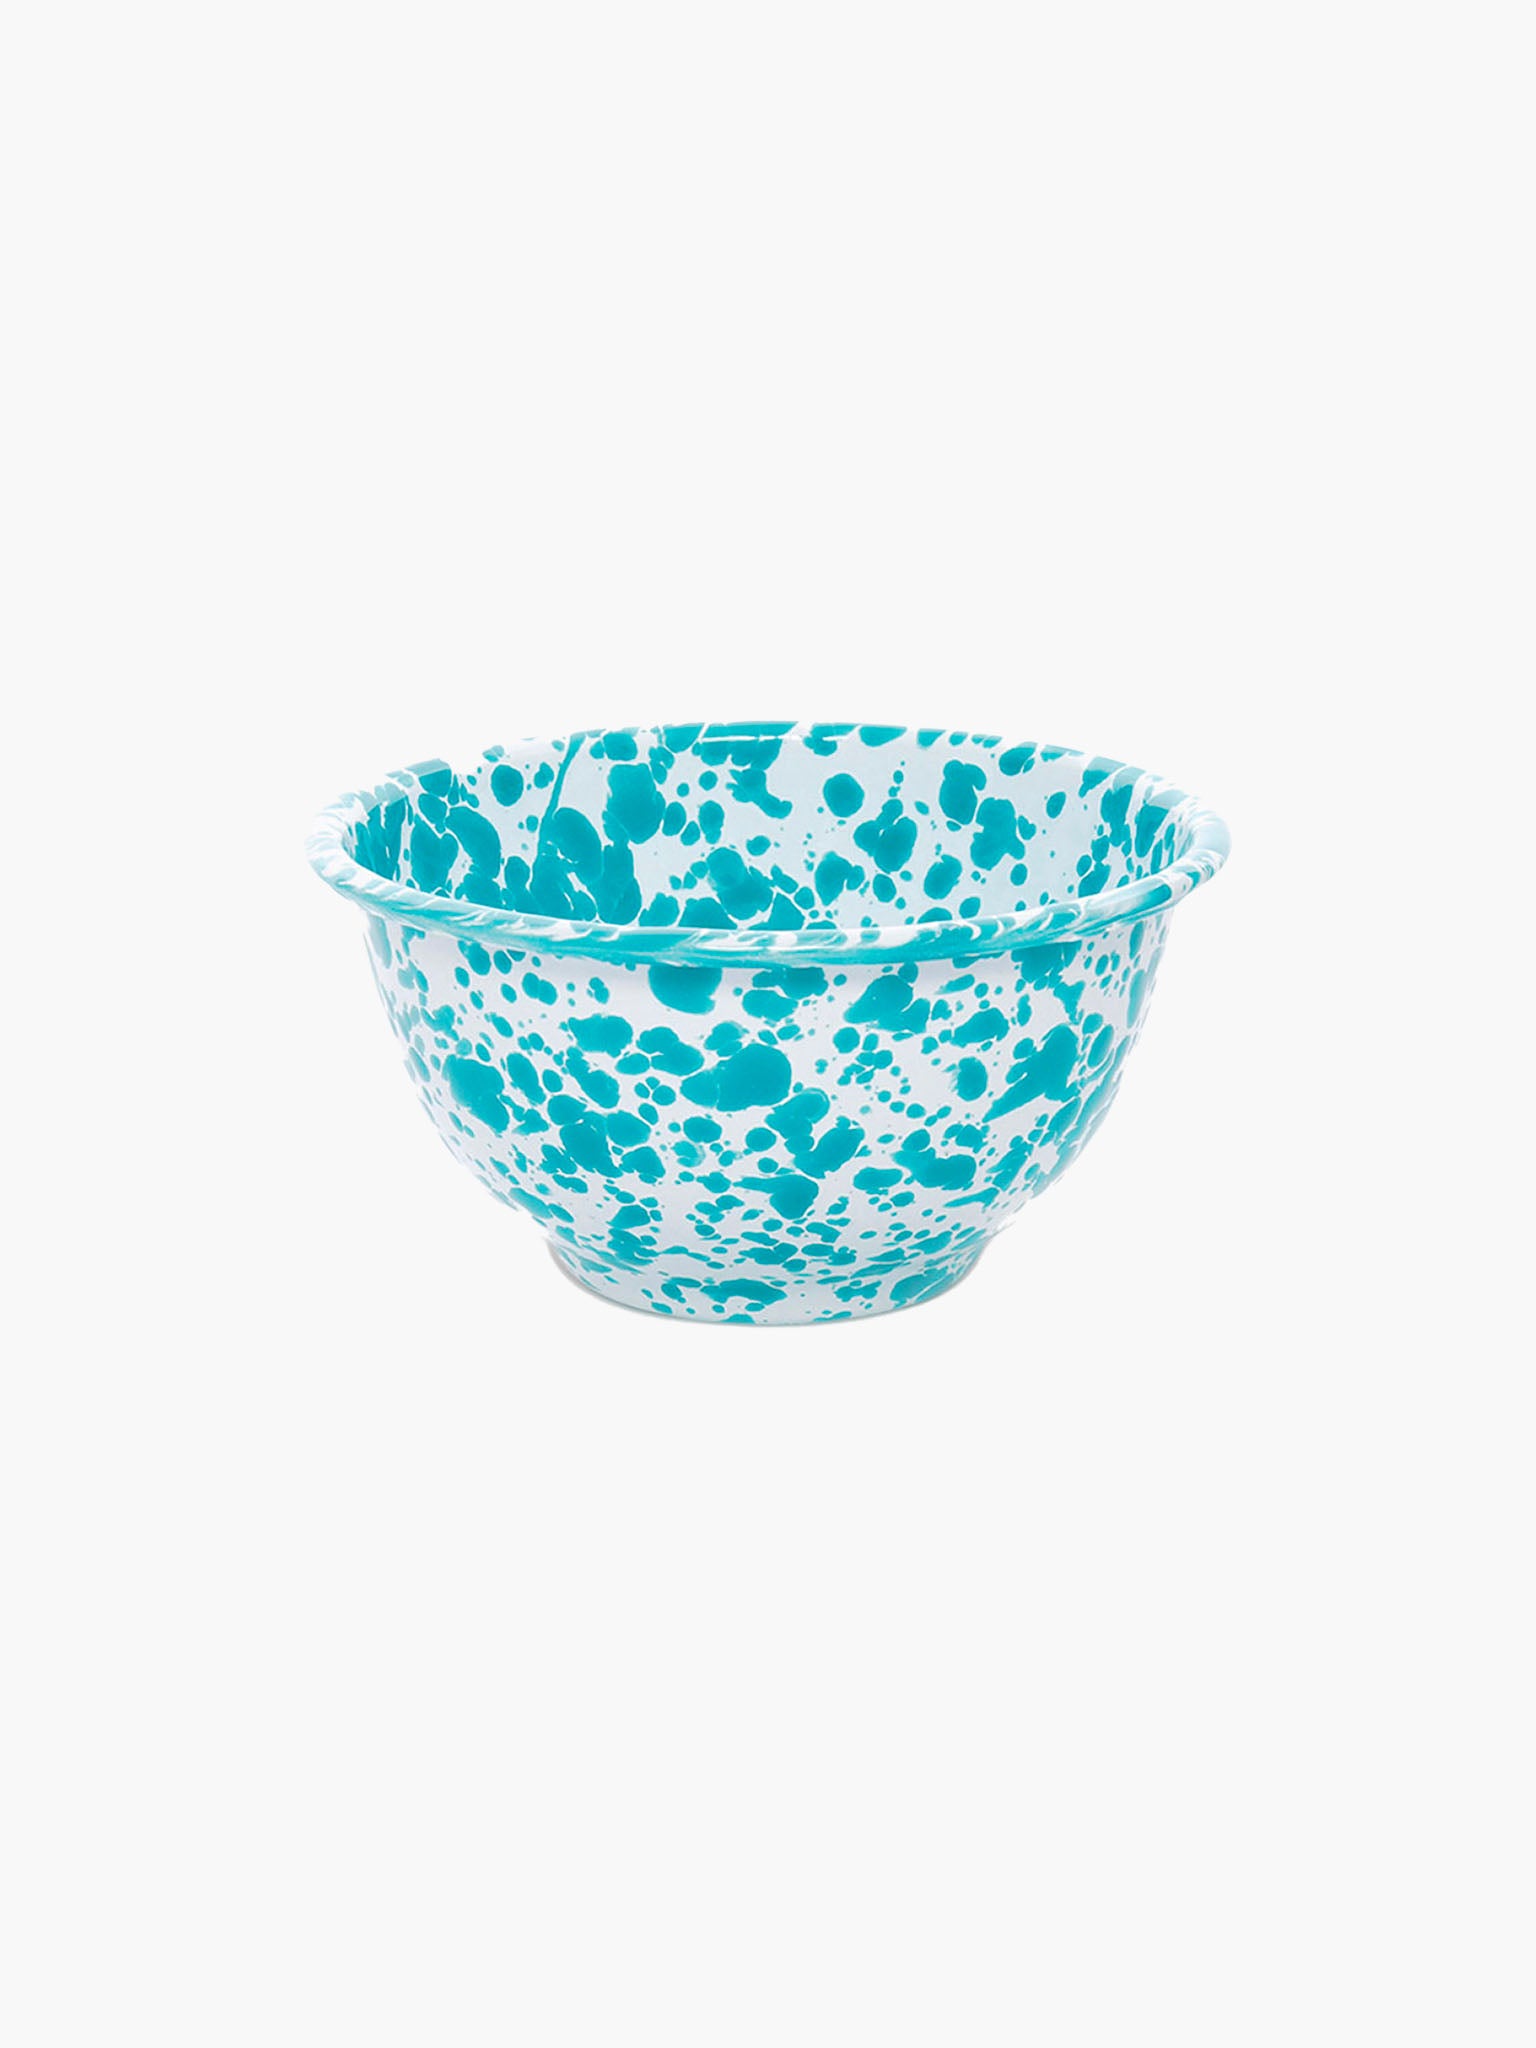 Splatter Small Footed Bowl (13cm) - Turquoise